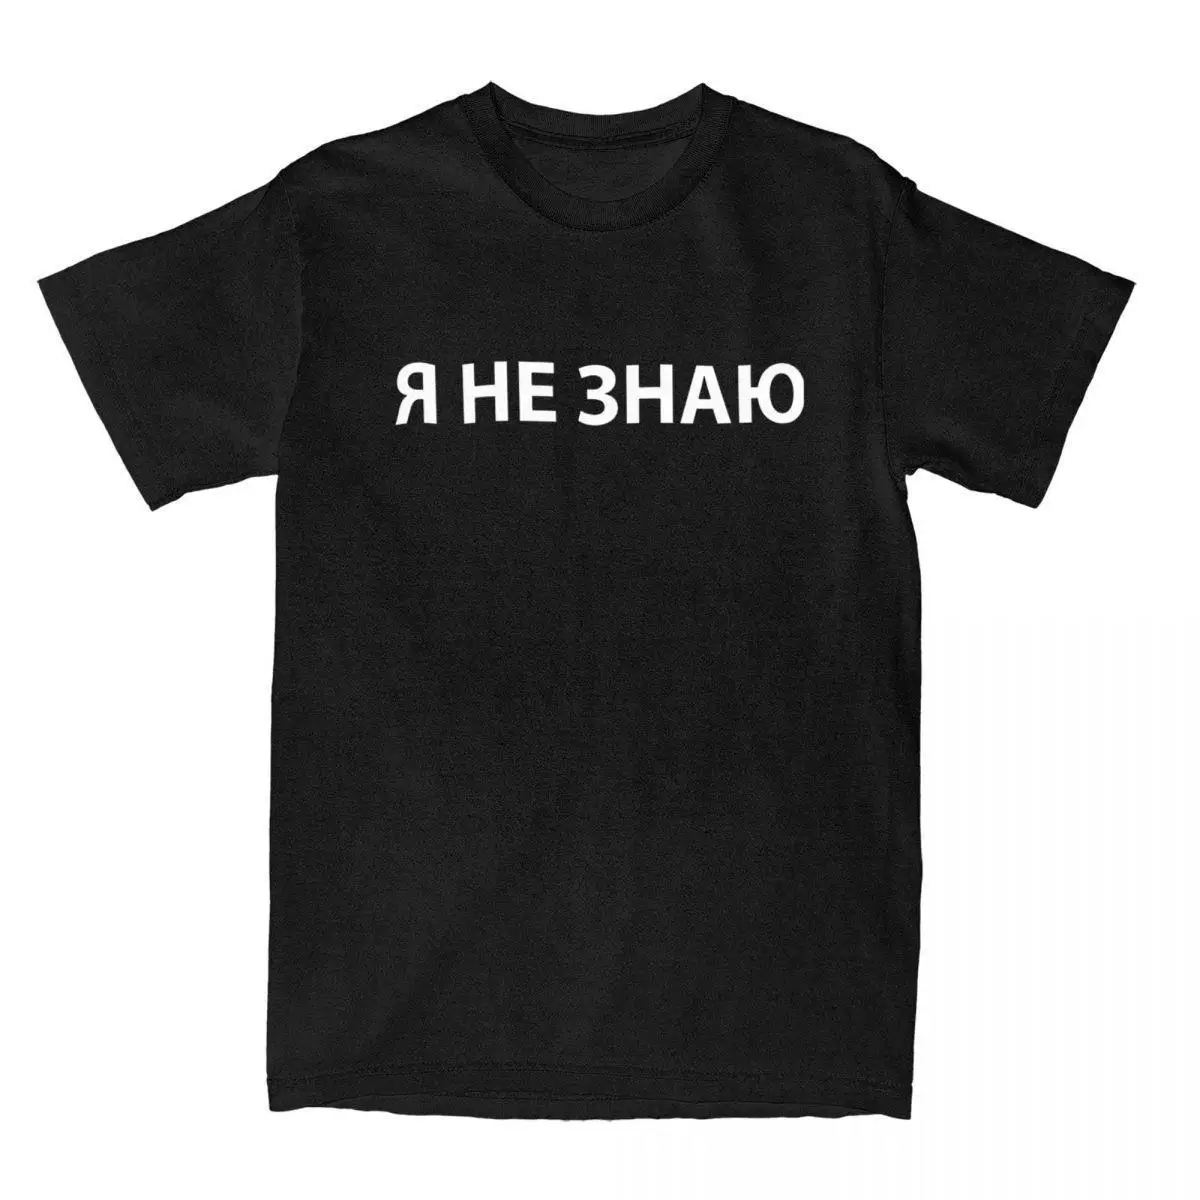 

Men T-Shirt Russian Language Student I Don't Know Humorous Pure Cotton Tees Short Sleeve T Shirt Round Neck Tops 4XL 5XL 6XL